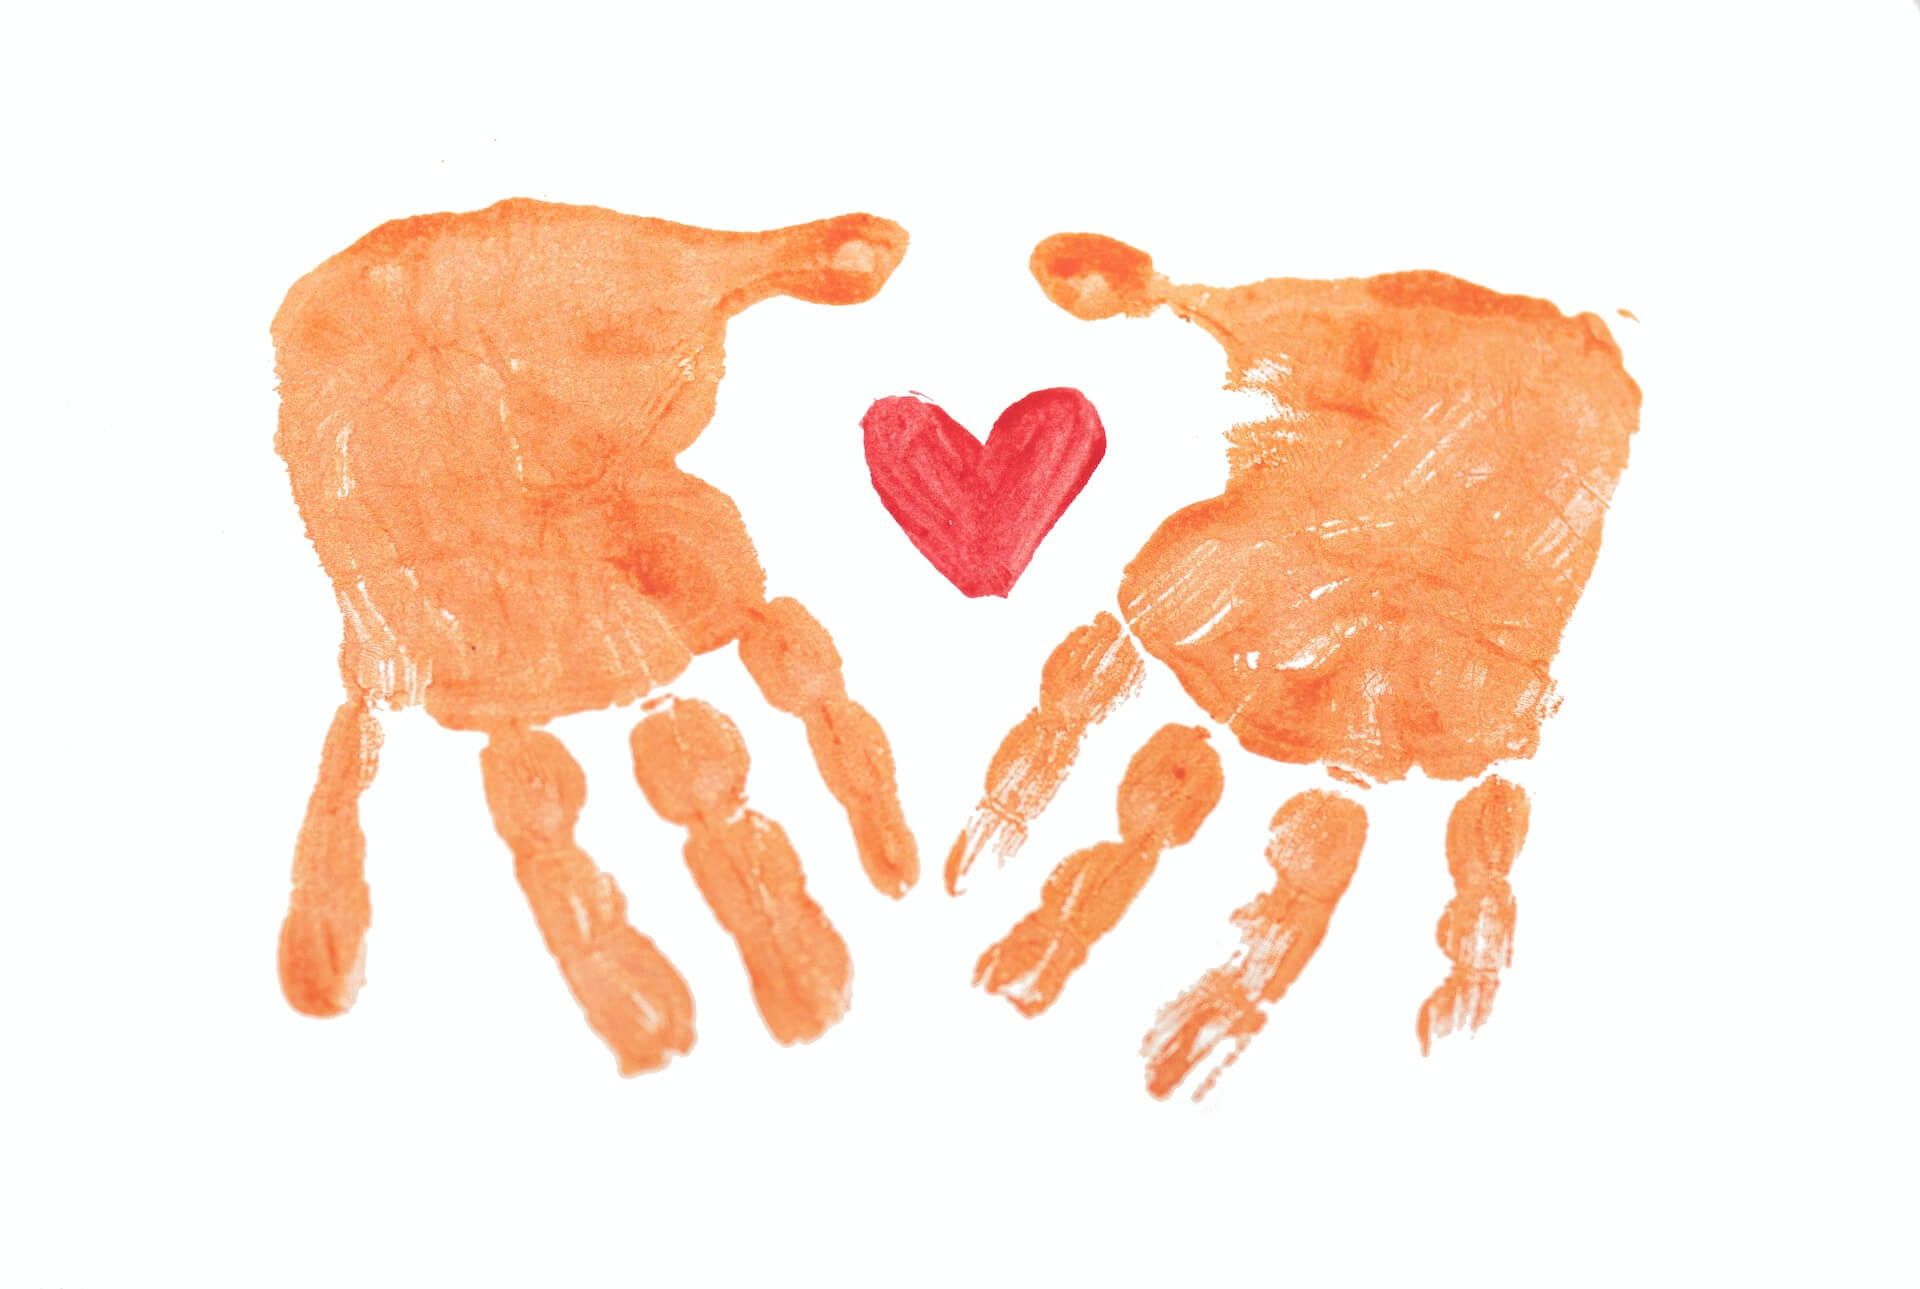 Two painted hands upside down, with a painted red heart in between.